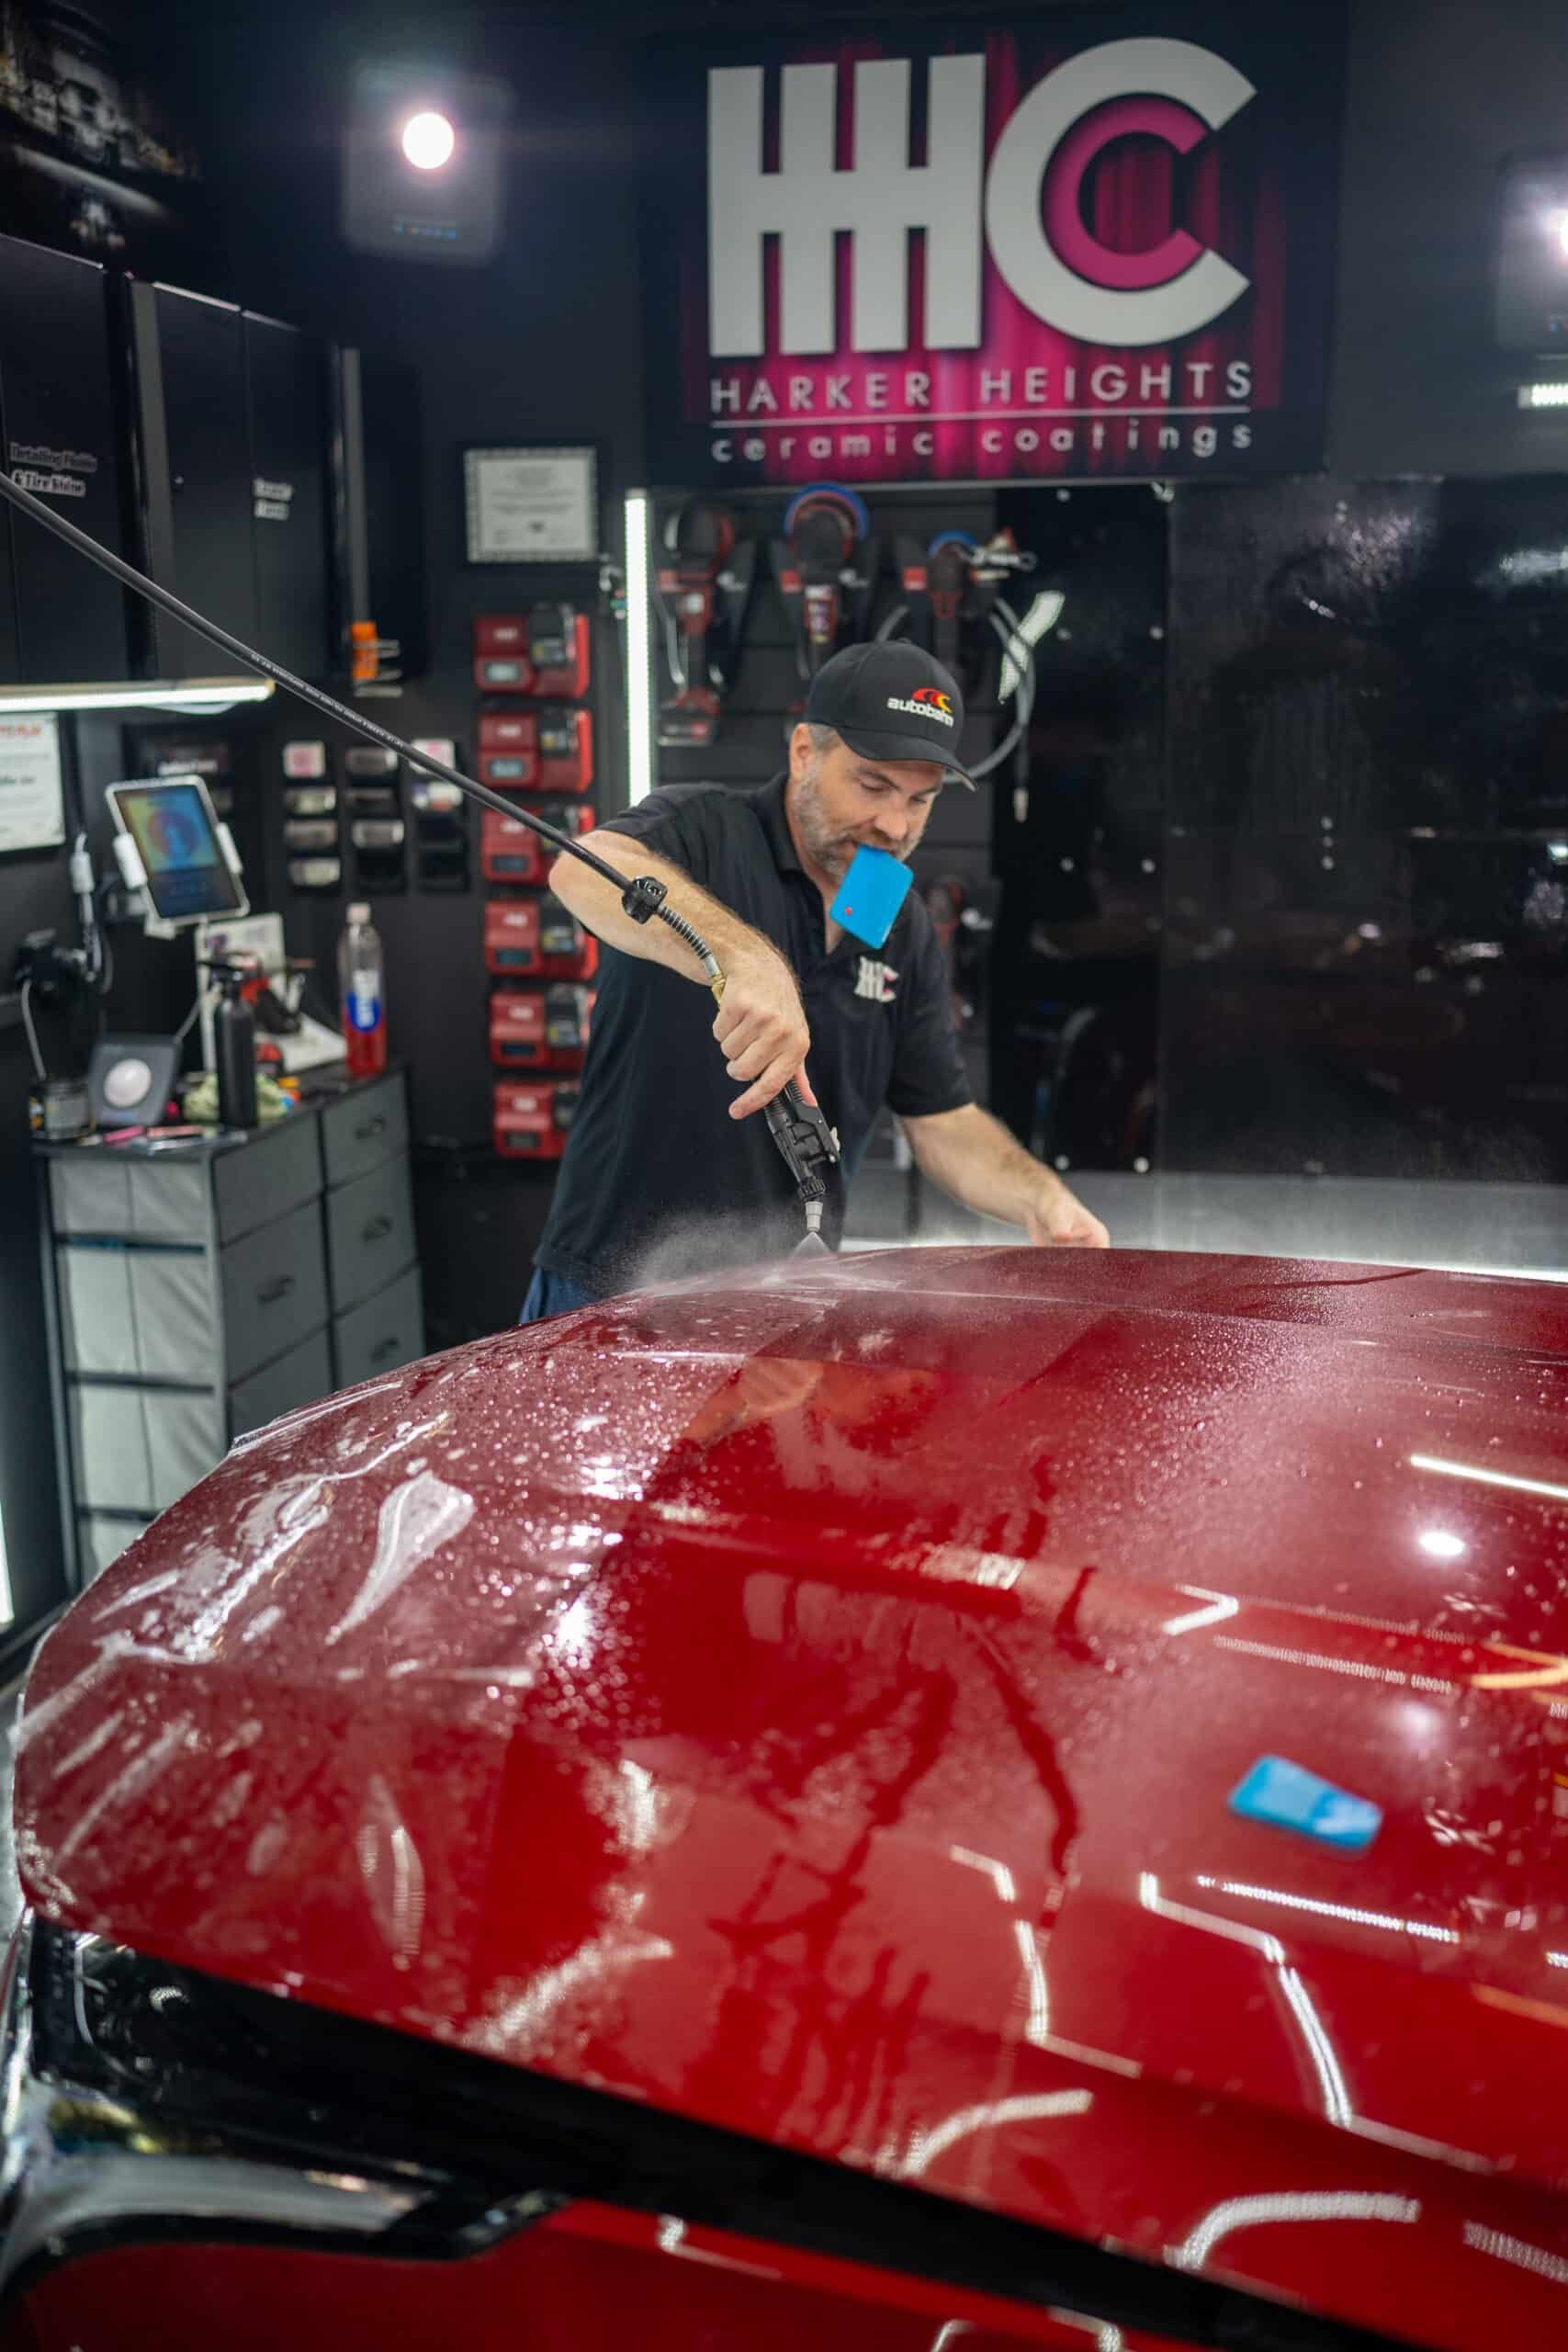 A man is polishing the hood of a red car in a garage.